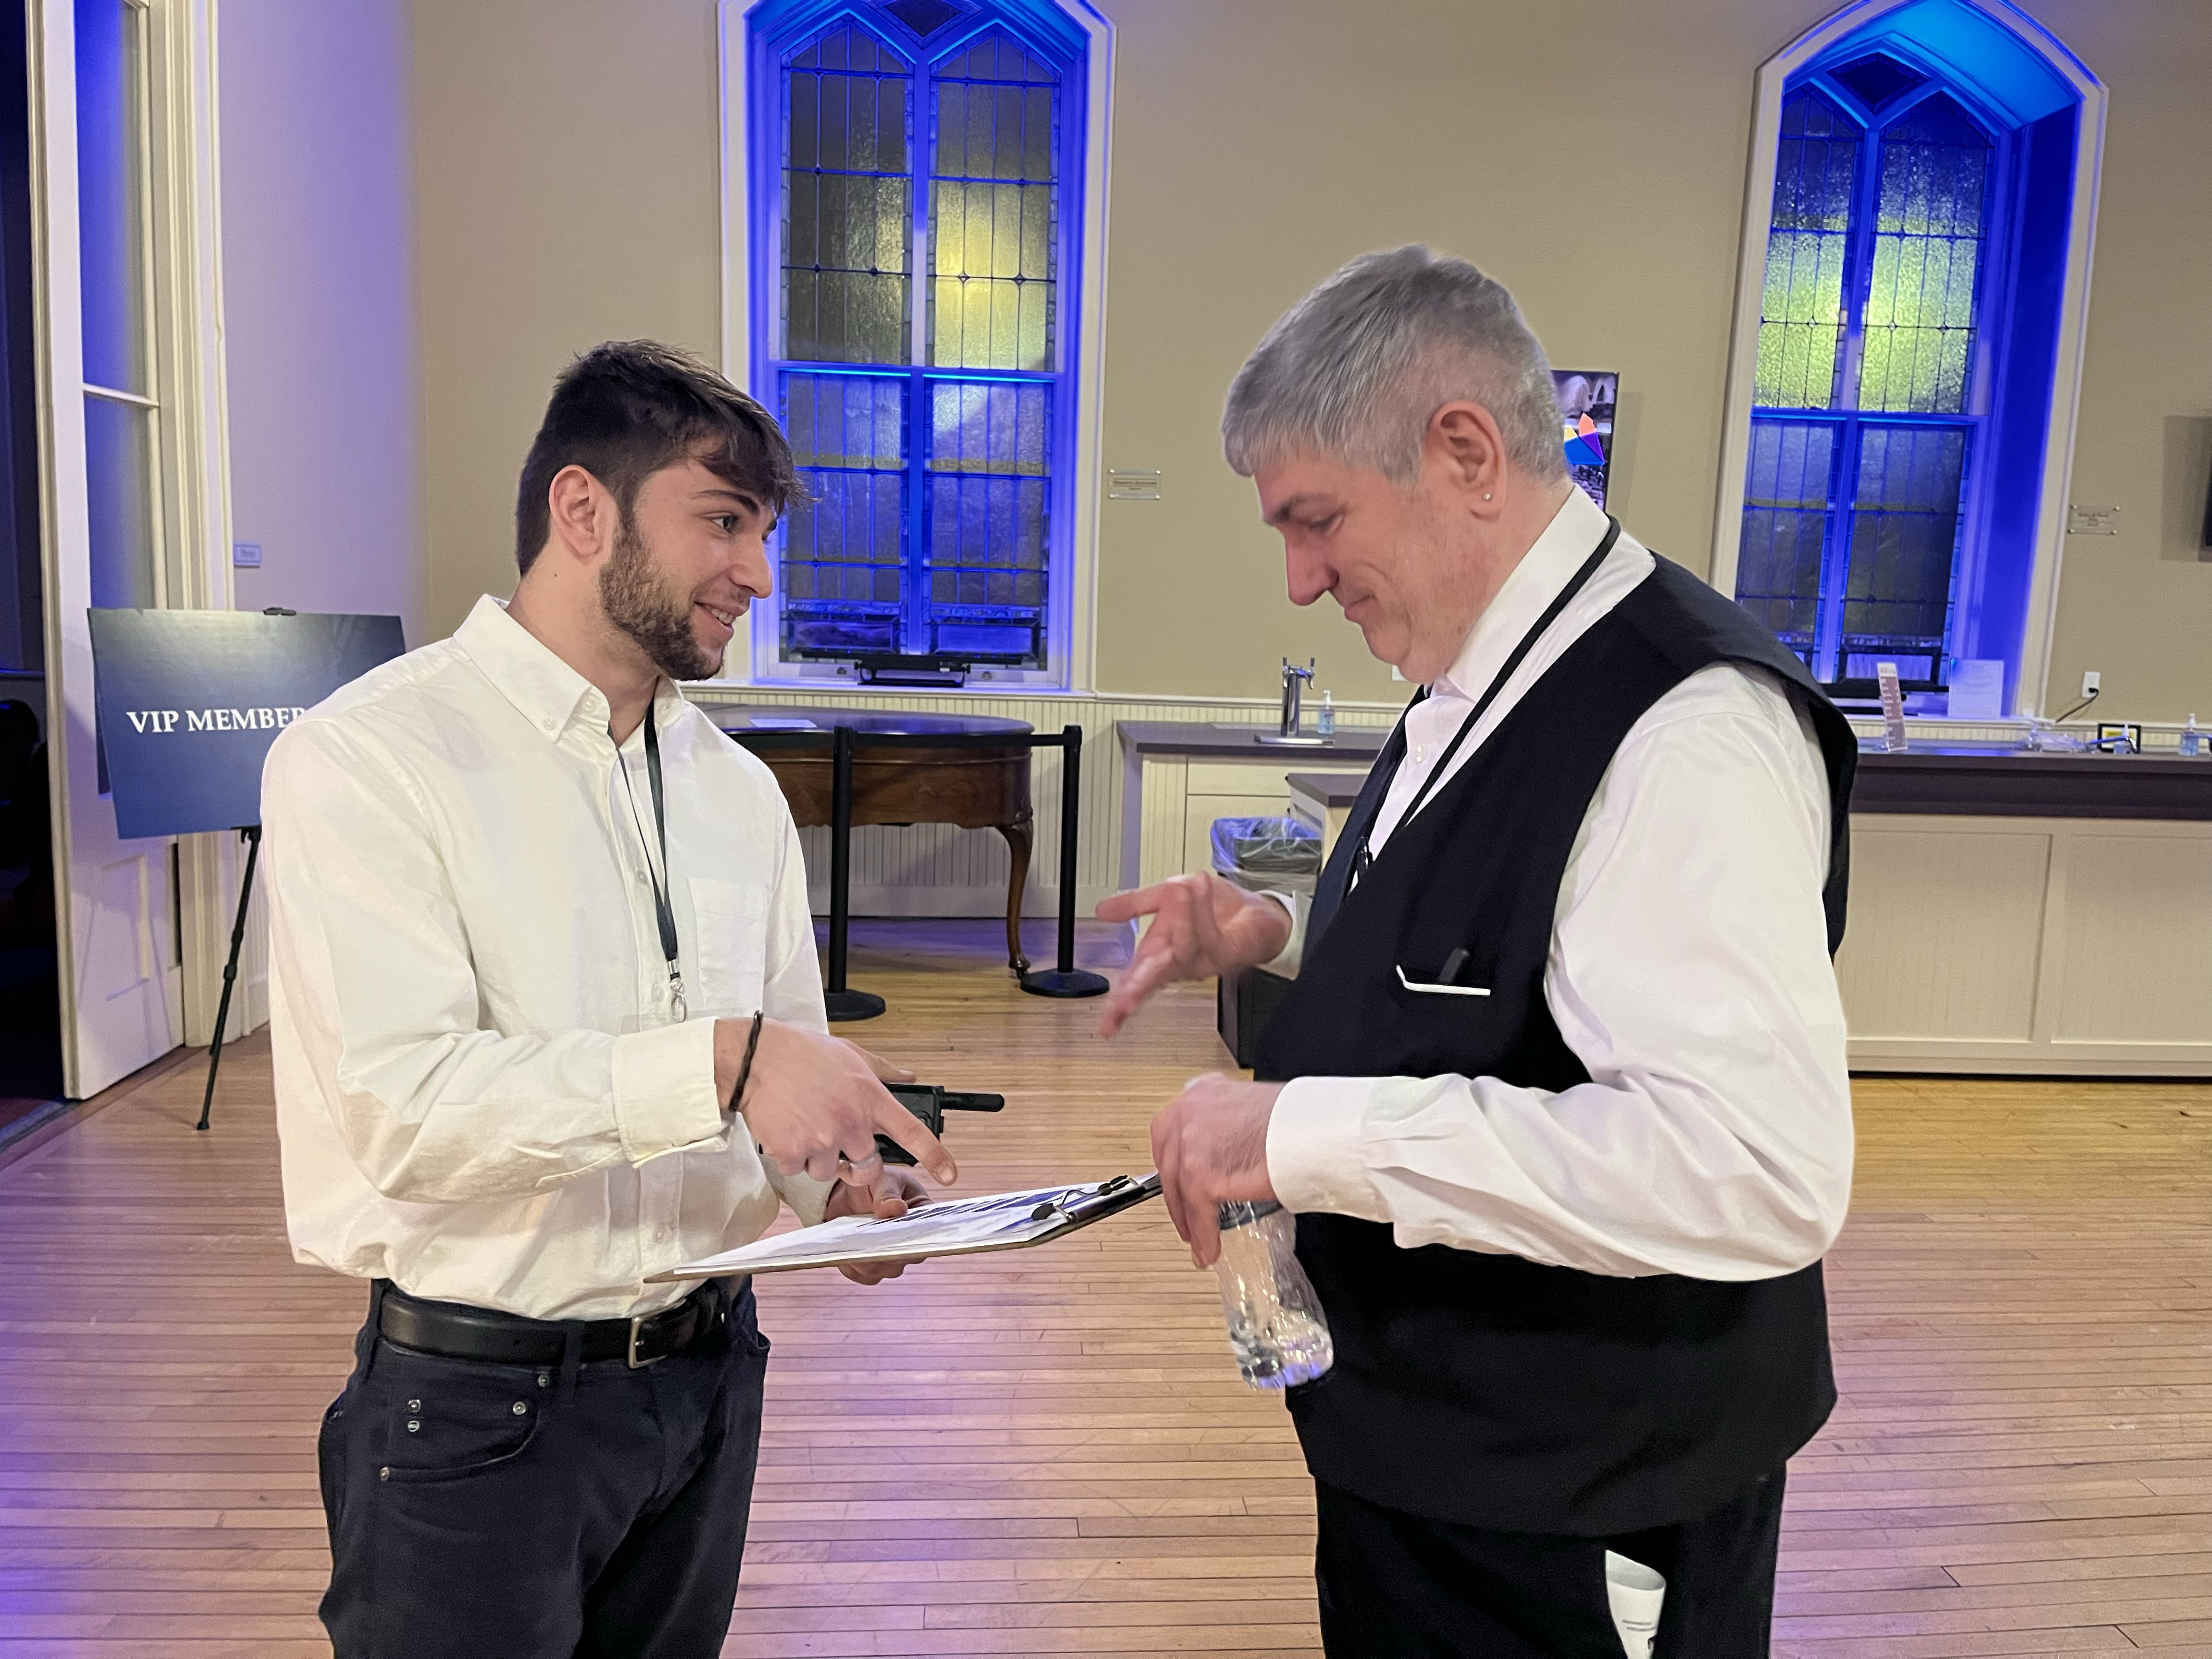 Eli Cott ’25 and UPH volunteer discuss venue preparations before guests’ arrival ahead of a recent performance.